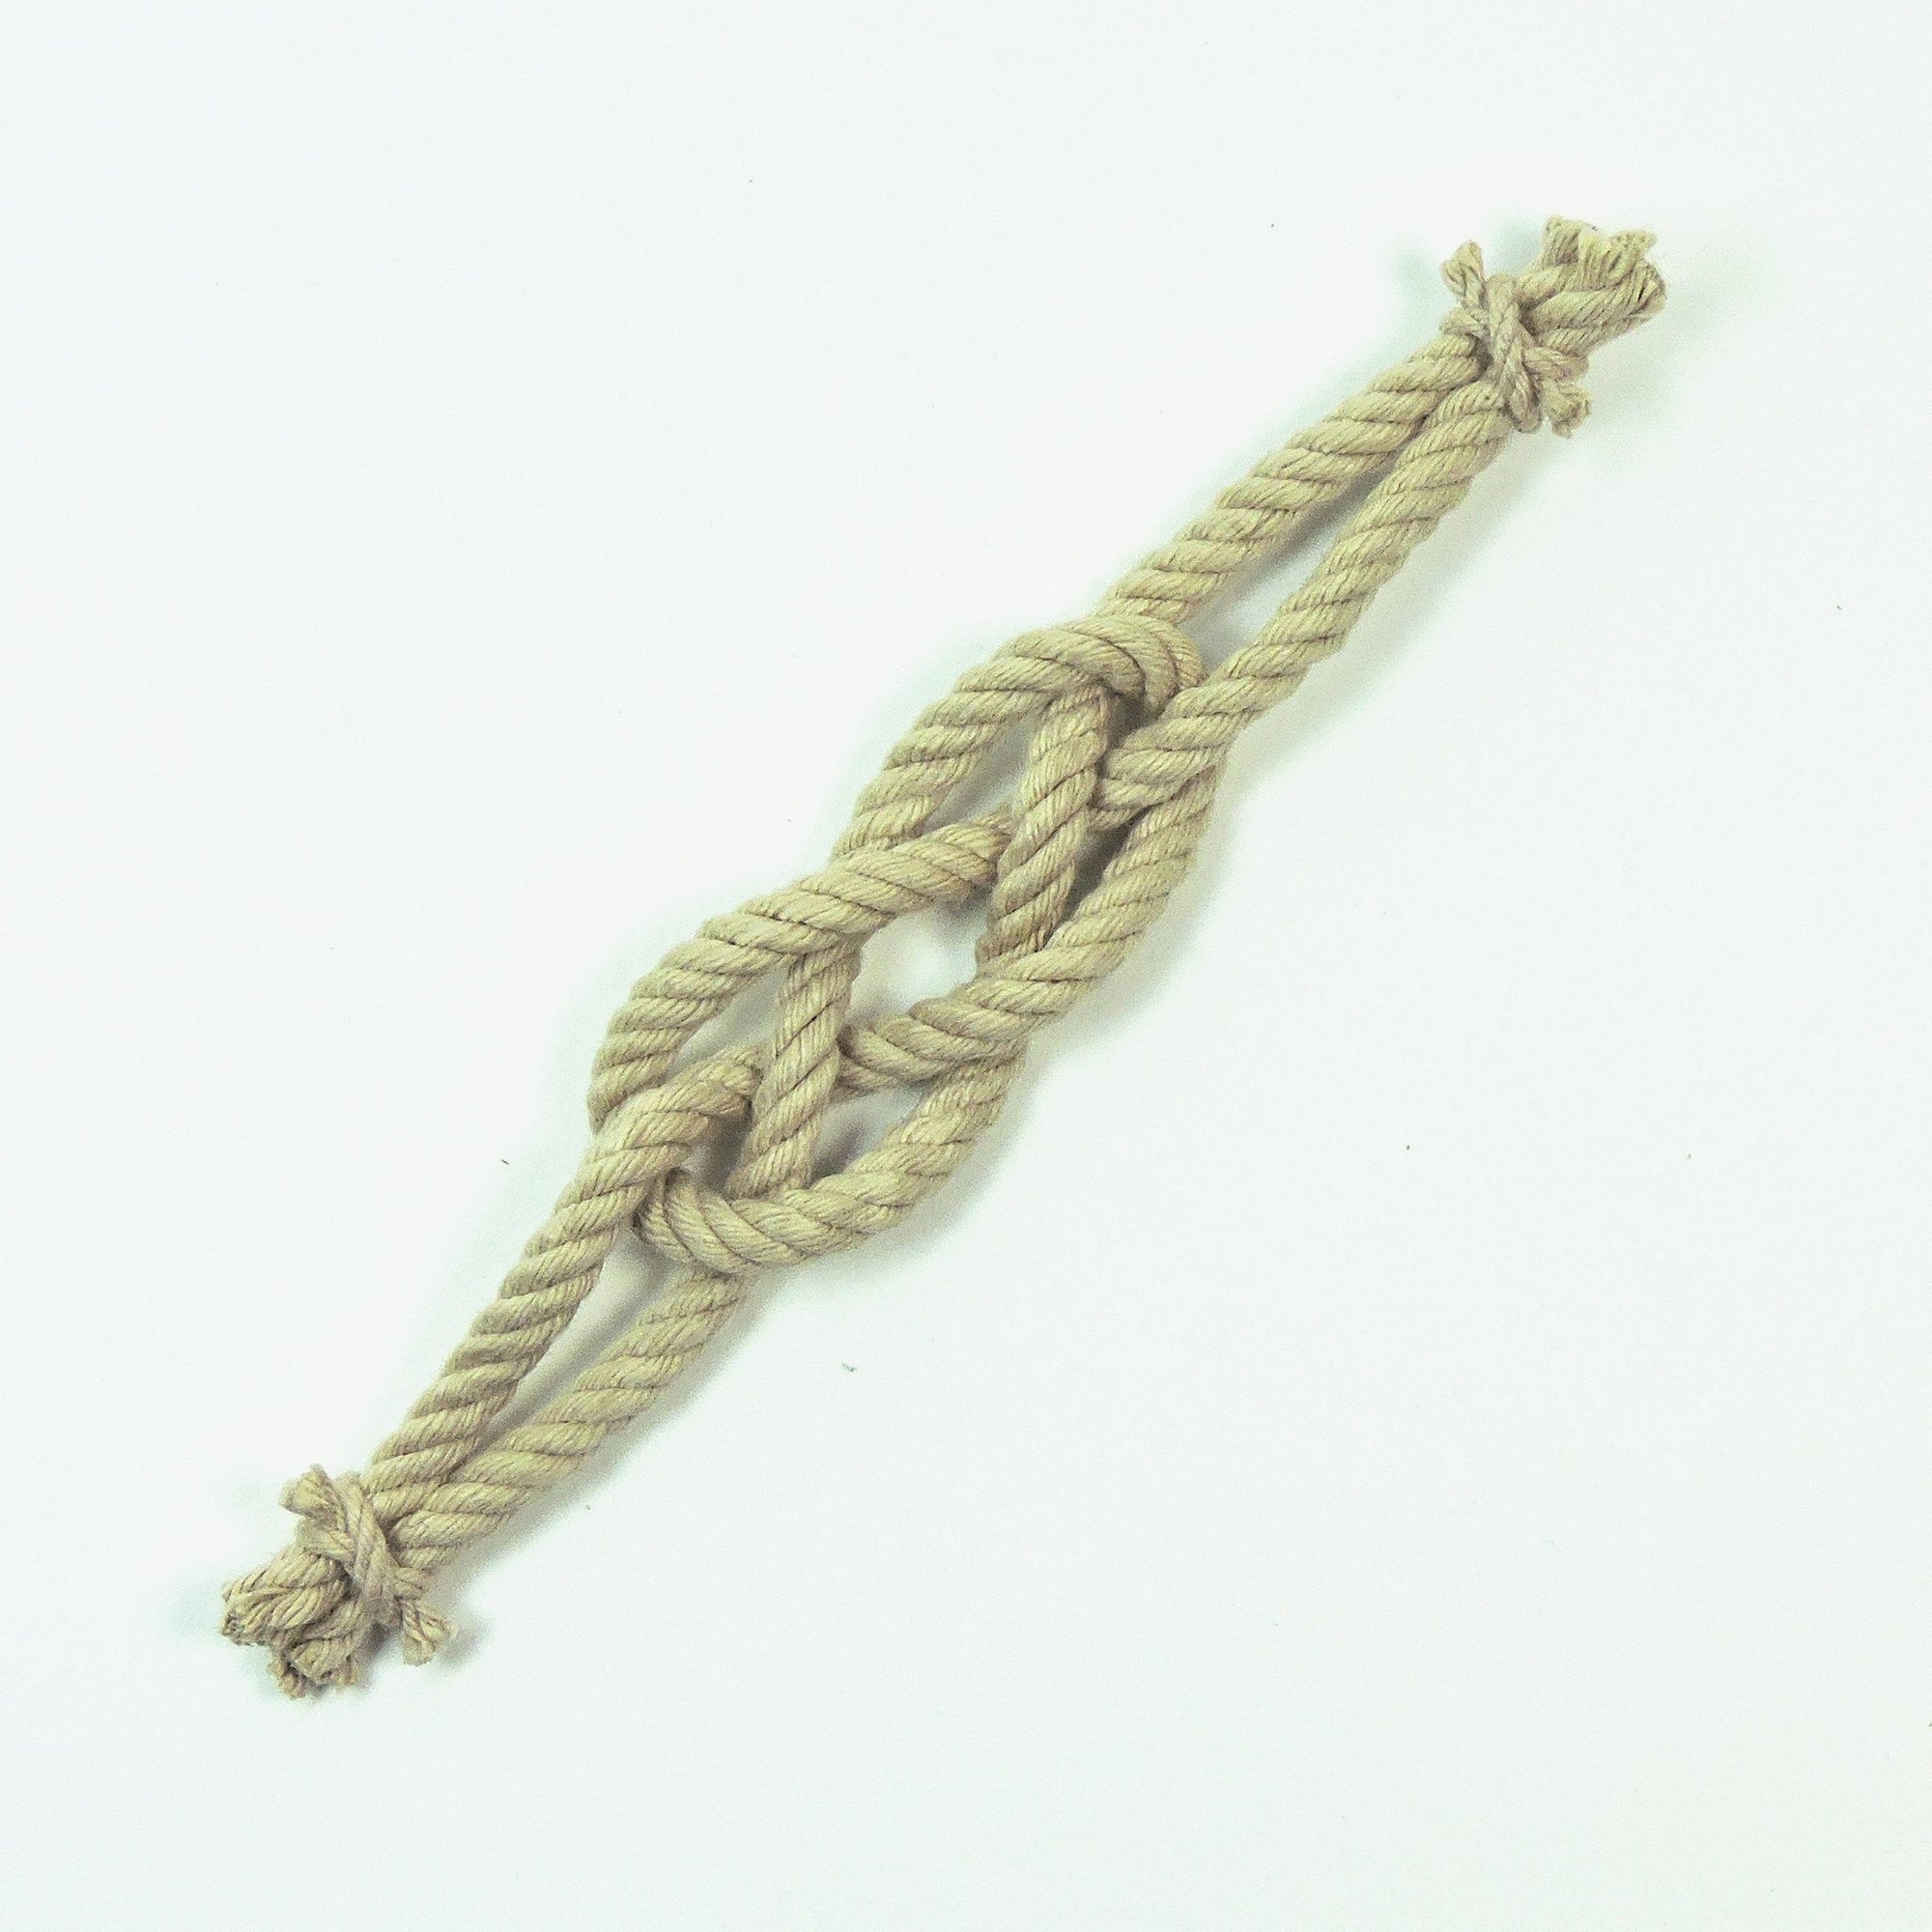 Nautical Knot Carrick Bend Boutonniere handmade at Mystic Knotwork